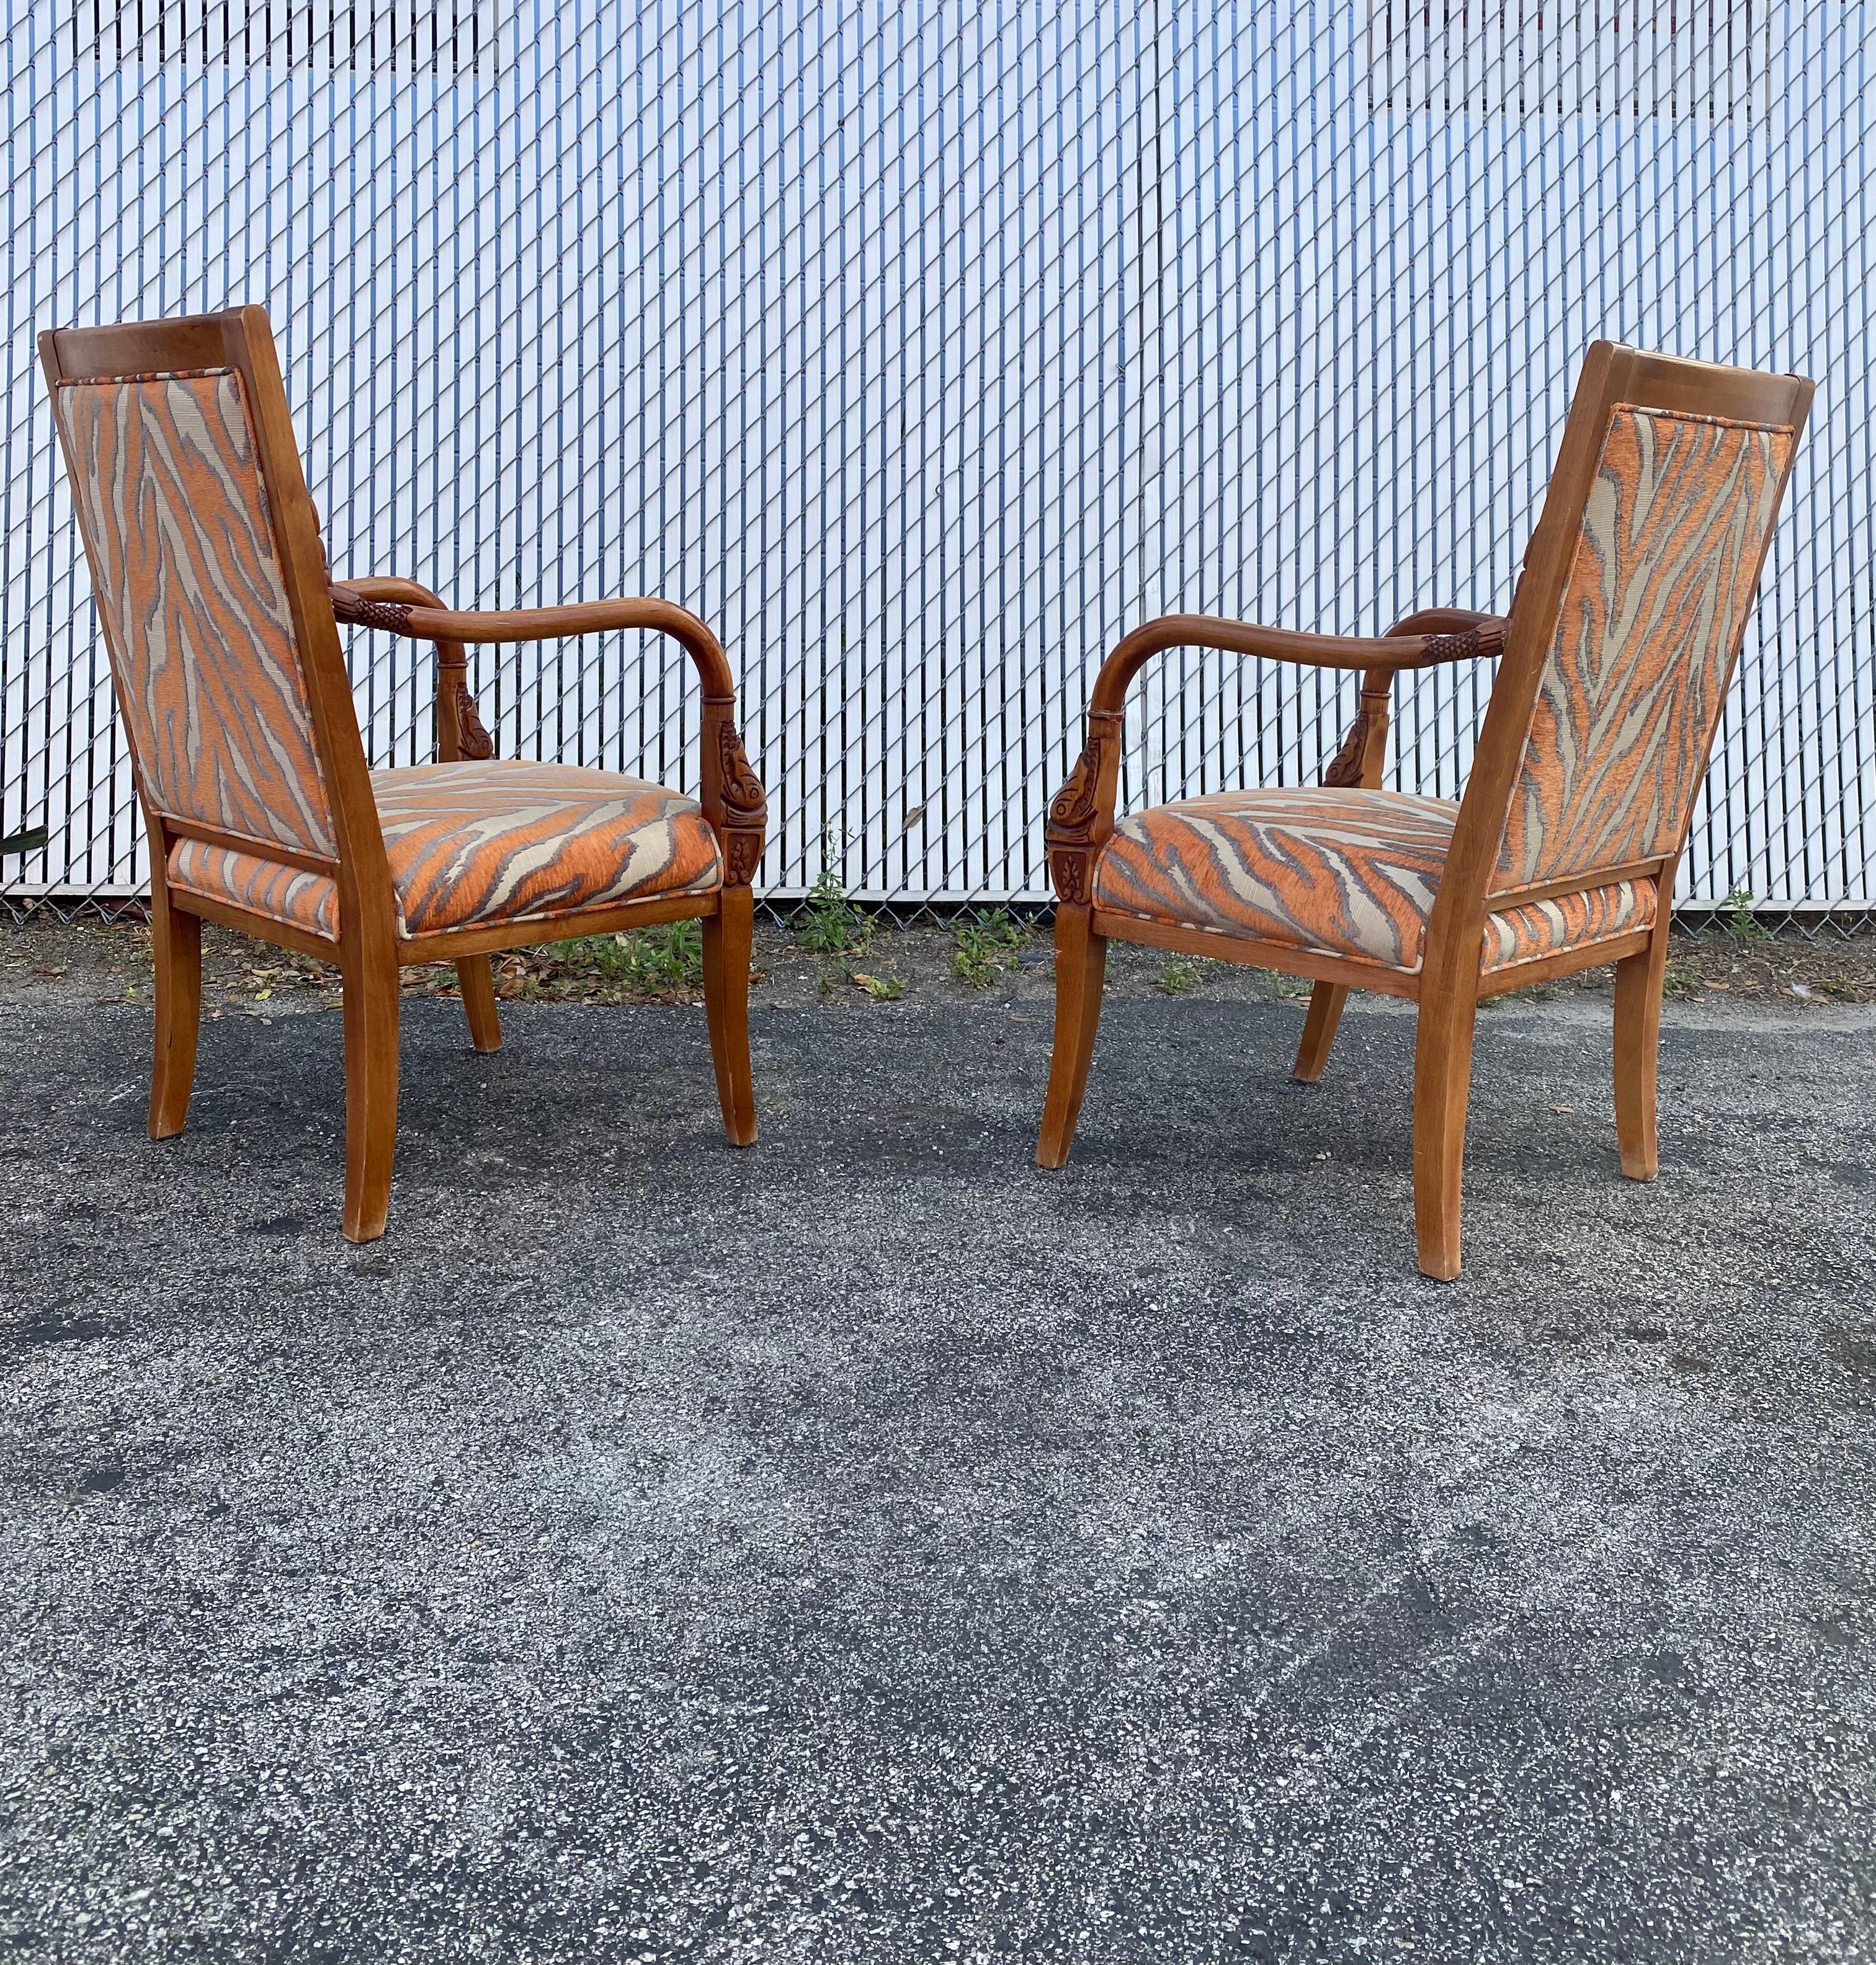 1970s Carved Wood Gold Fish Zebra Bentwood Chairs and Ottoman, Set of 3 In Good Condition For Sale In Fort Lauderdale, FL